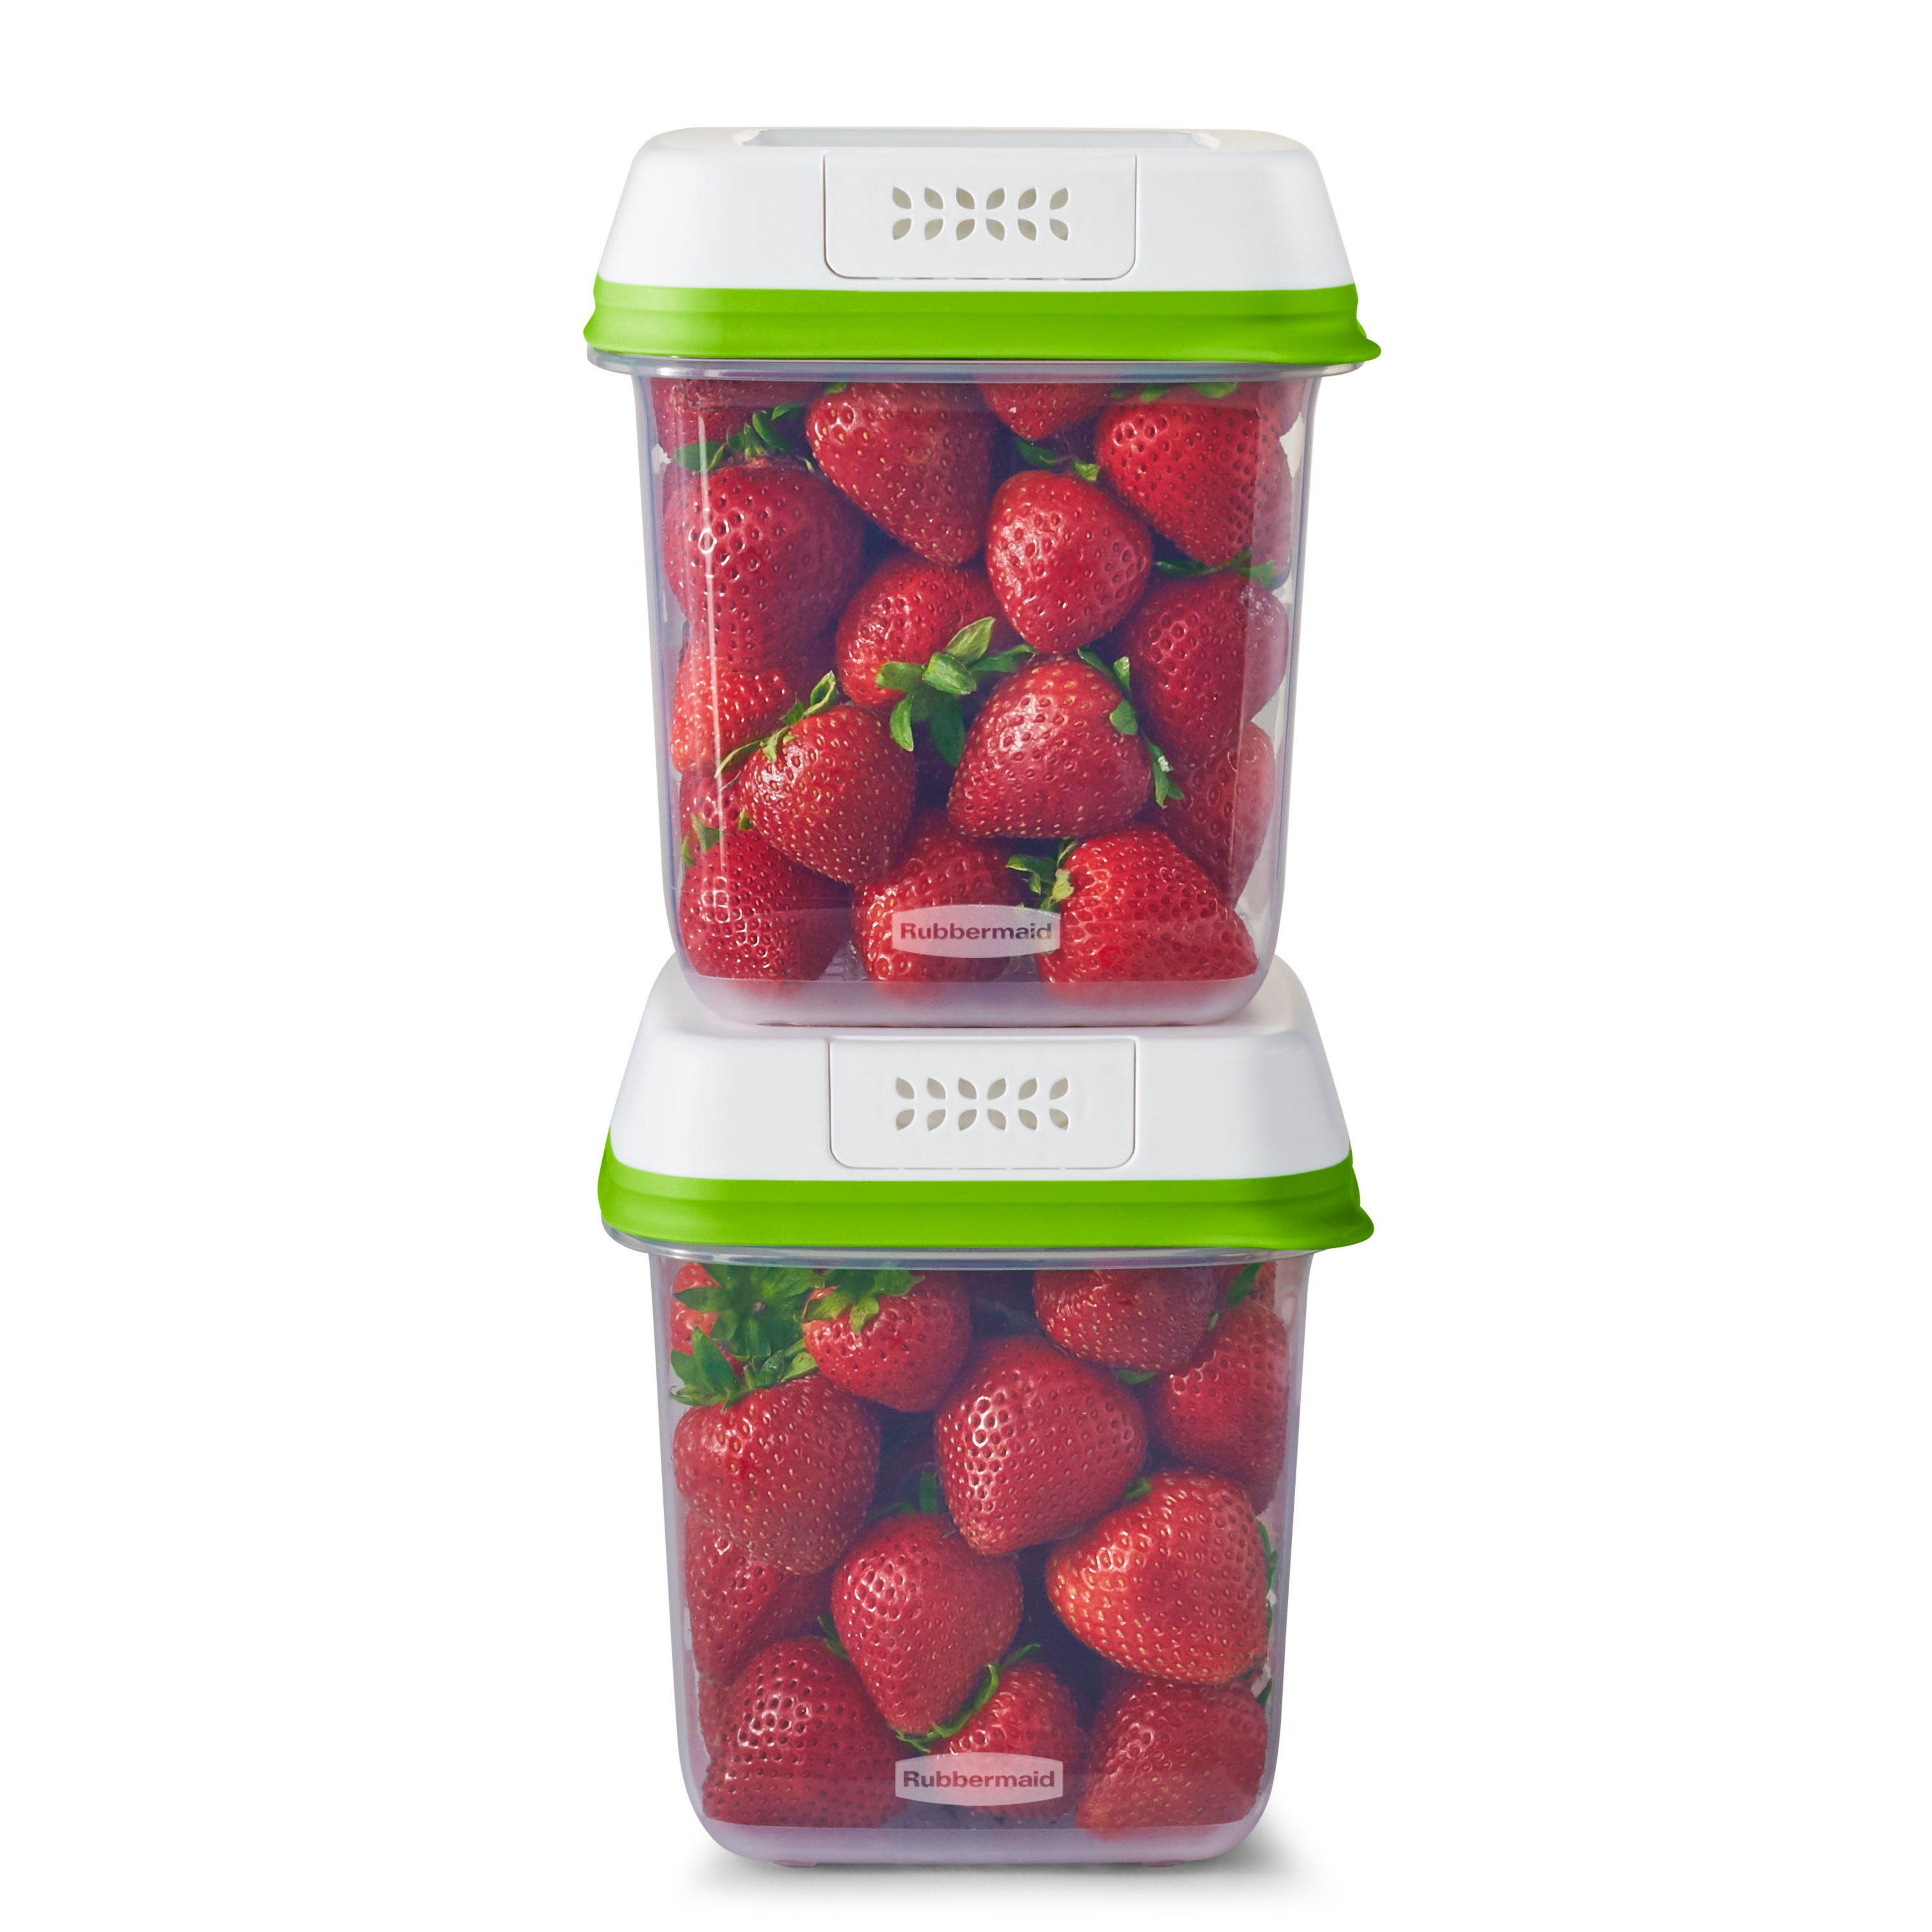 Rubbermaid FreshWorks Produce Saver, Medium and Large Produce Plastic Storage  Containers, 6-Piece Set 